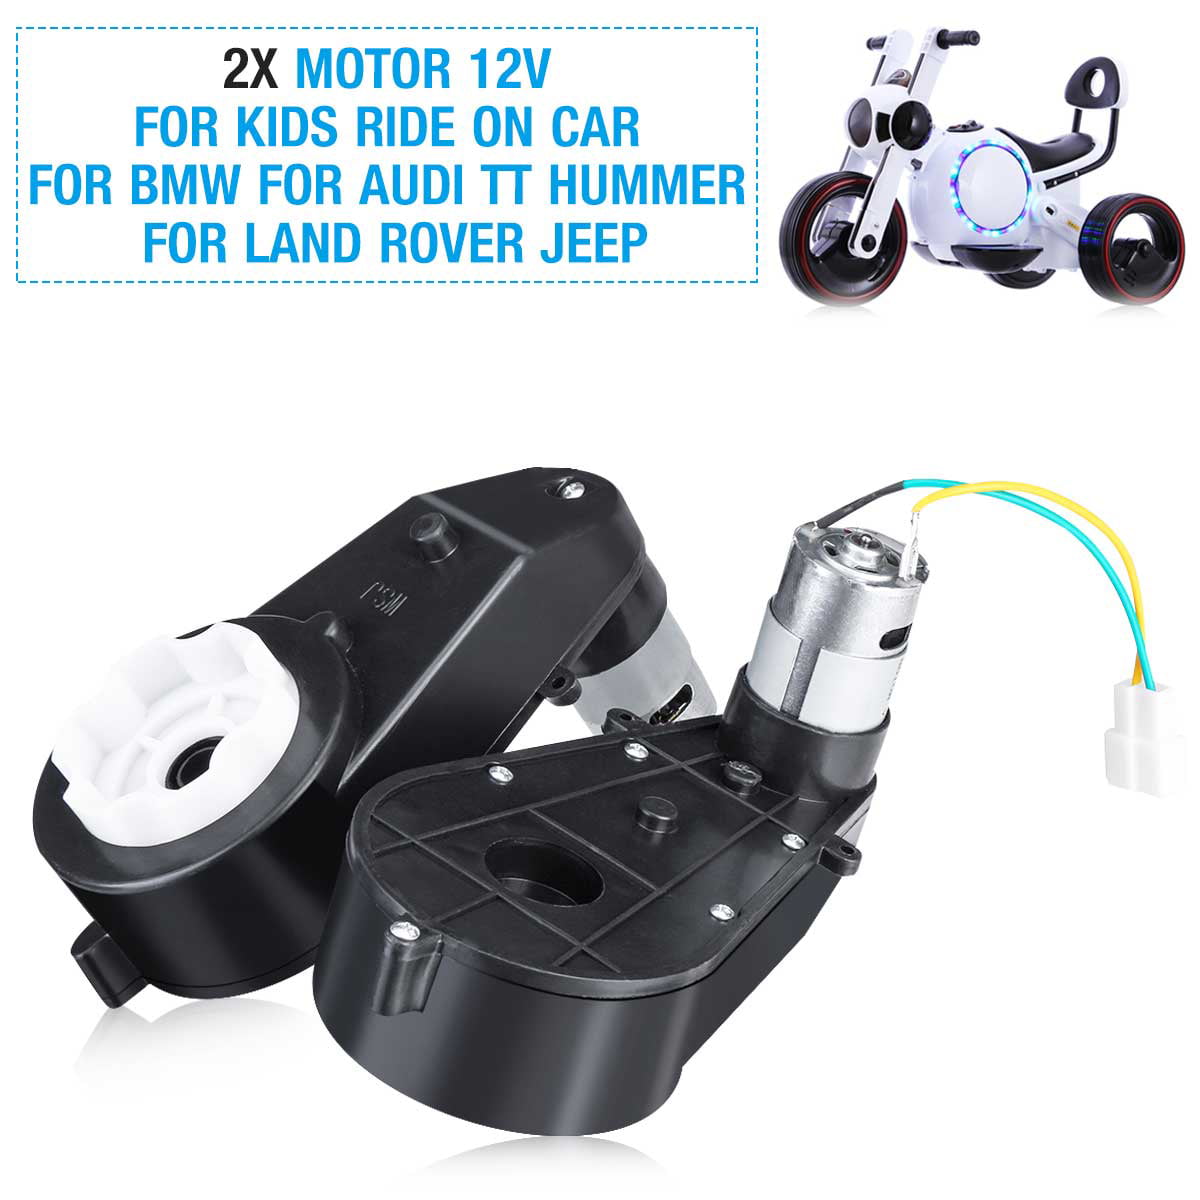 2x 12V 12000RPM Electric Motor Gear Box For Kids Carriage Ride On Bike Car Toy 